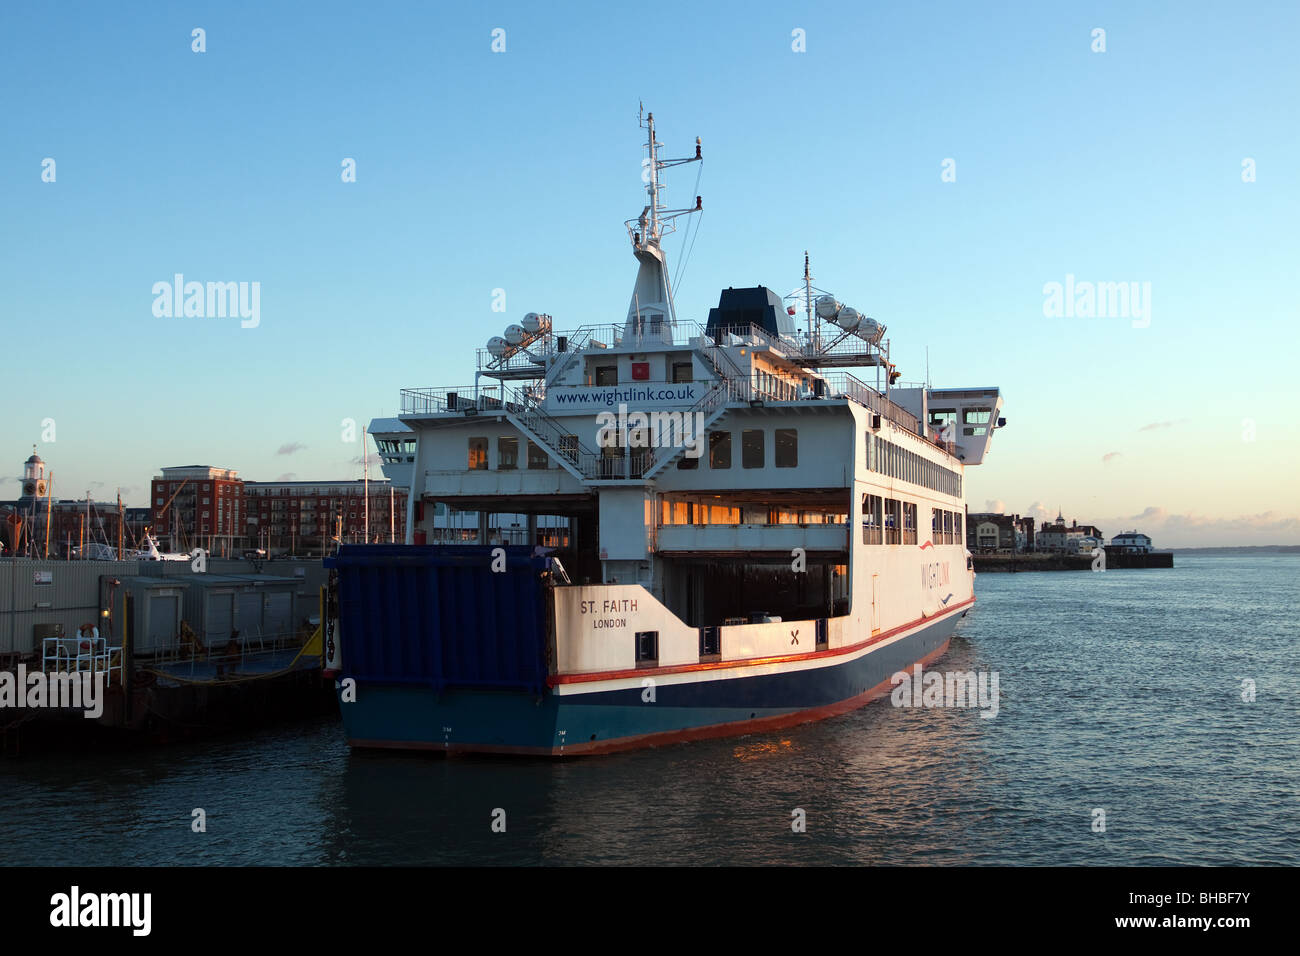 A  Wightlink car and passenger ferry called St Faith moored in Portsmouth Stock Photo